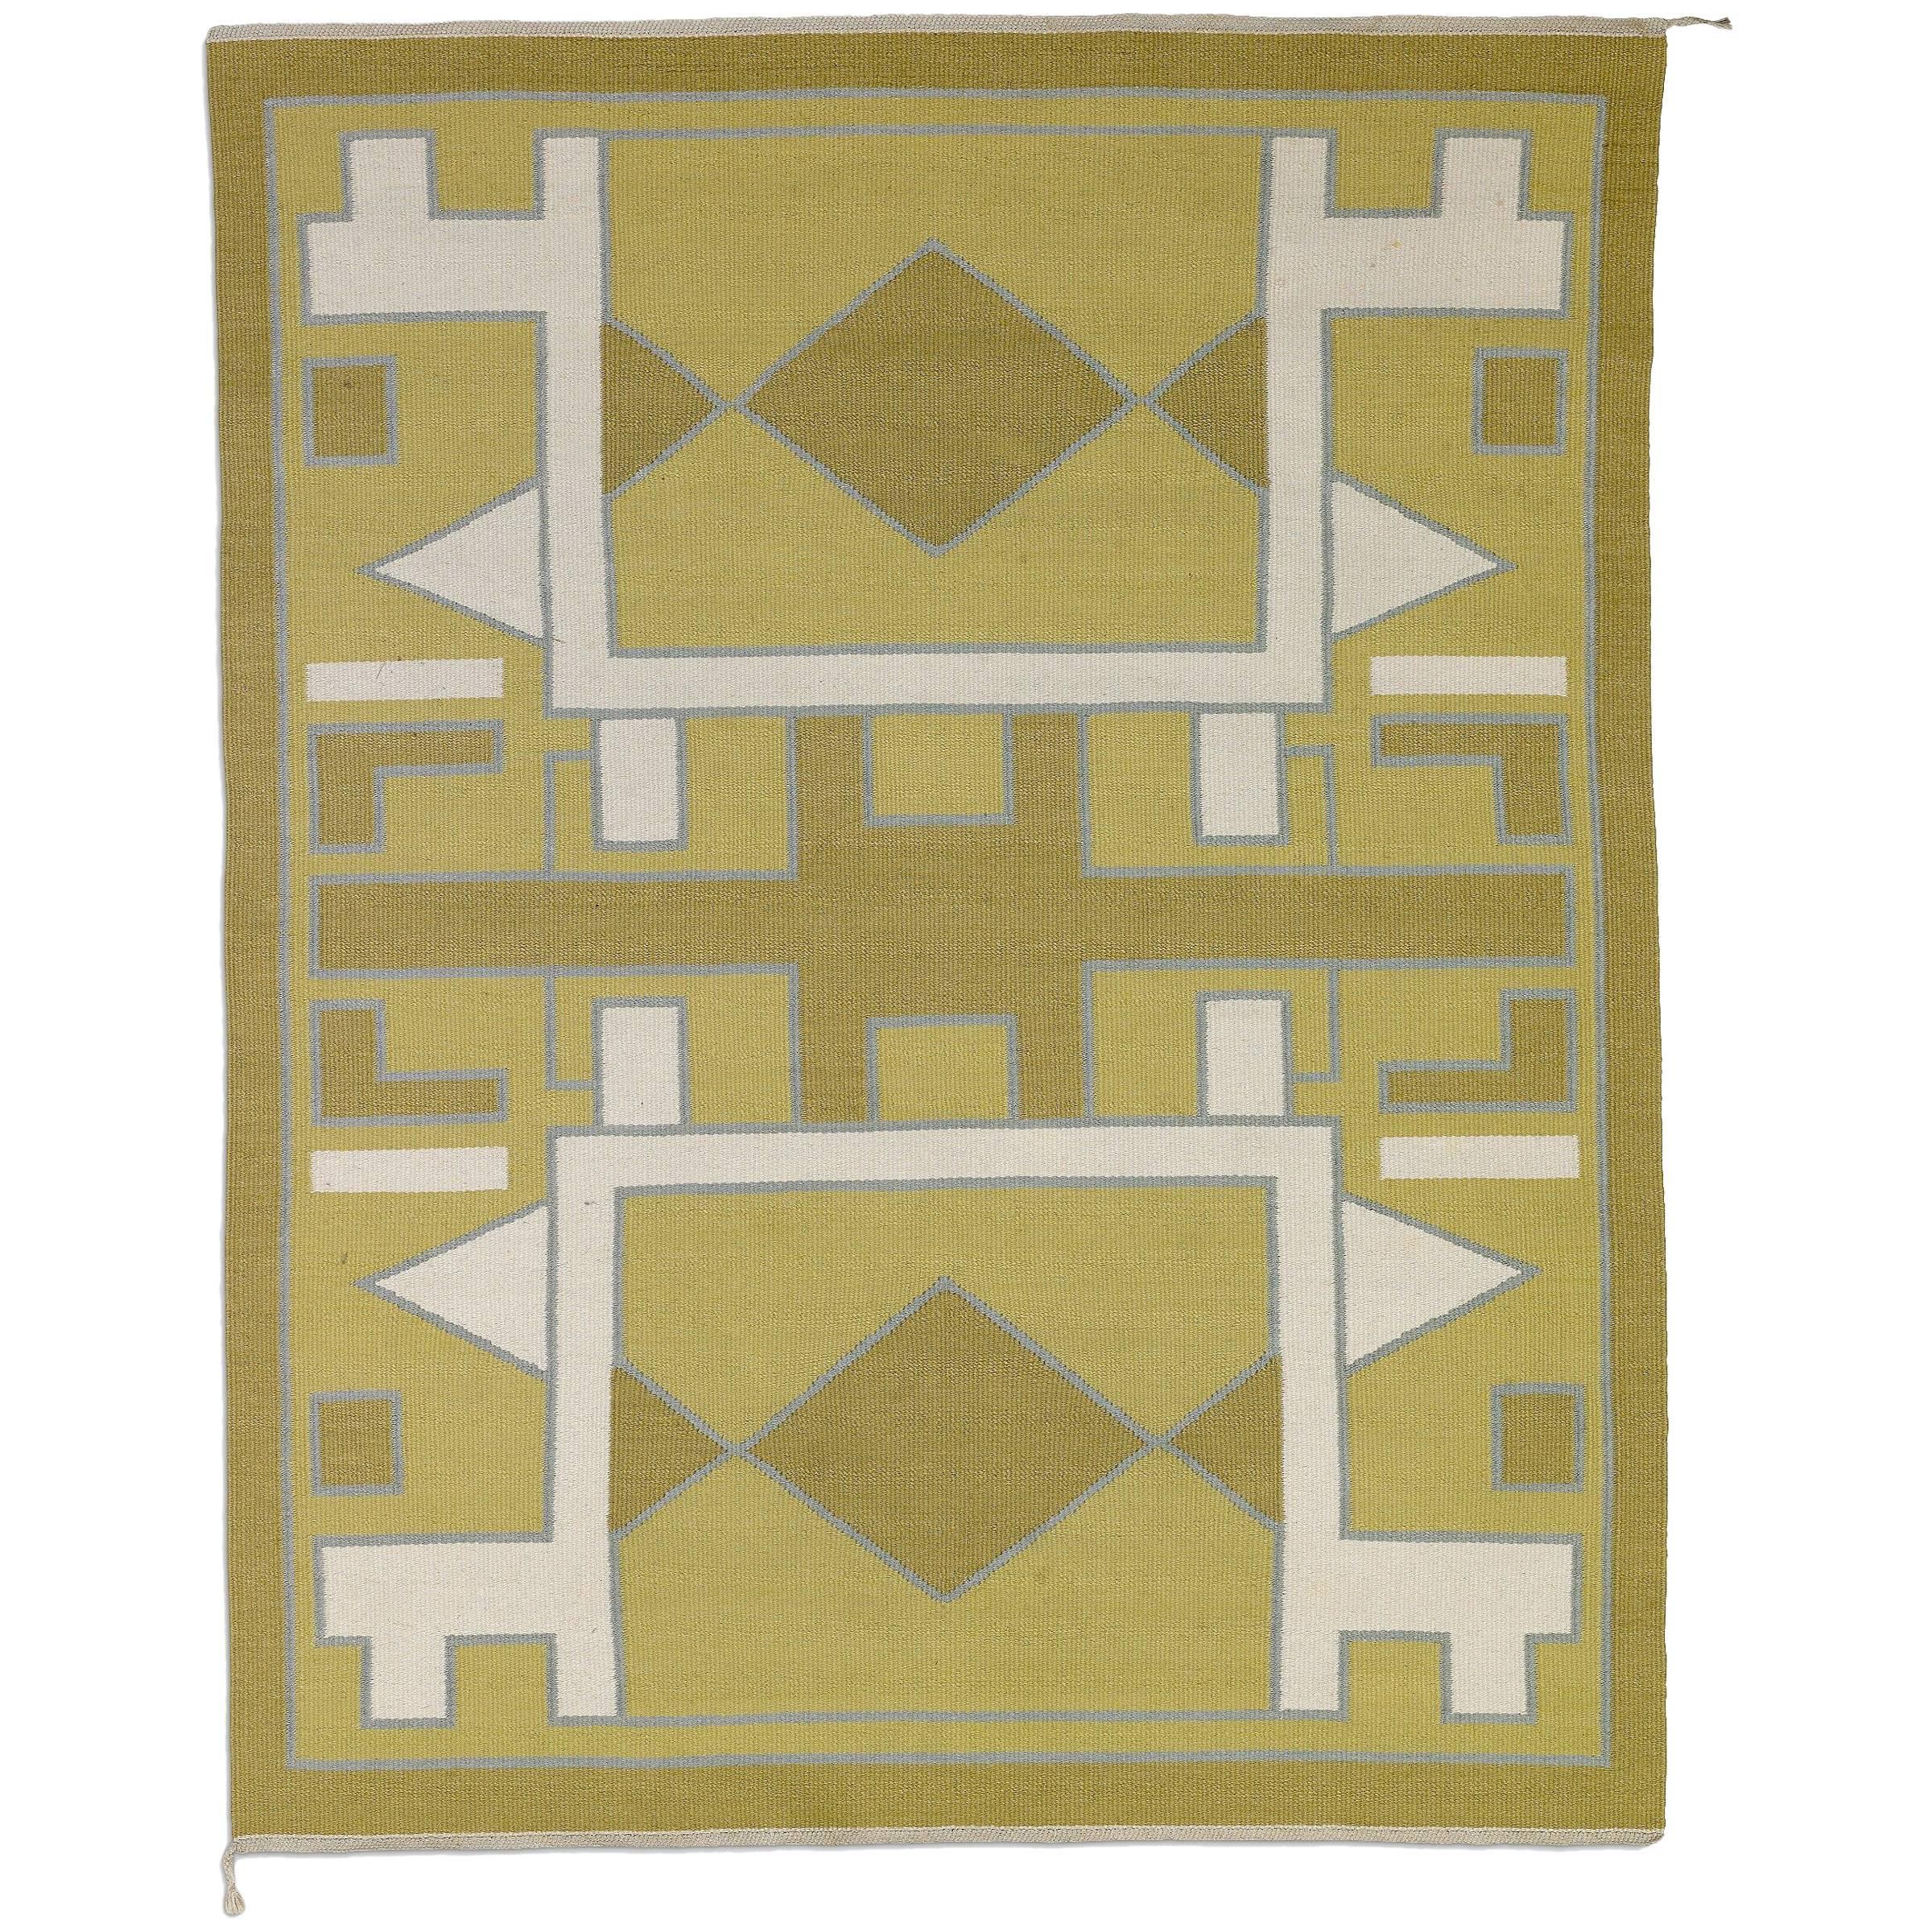 Anna Thommesen, Unique Handwoven Carpet / Wall Tapestry, circa 1950 For Sale